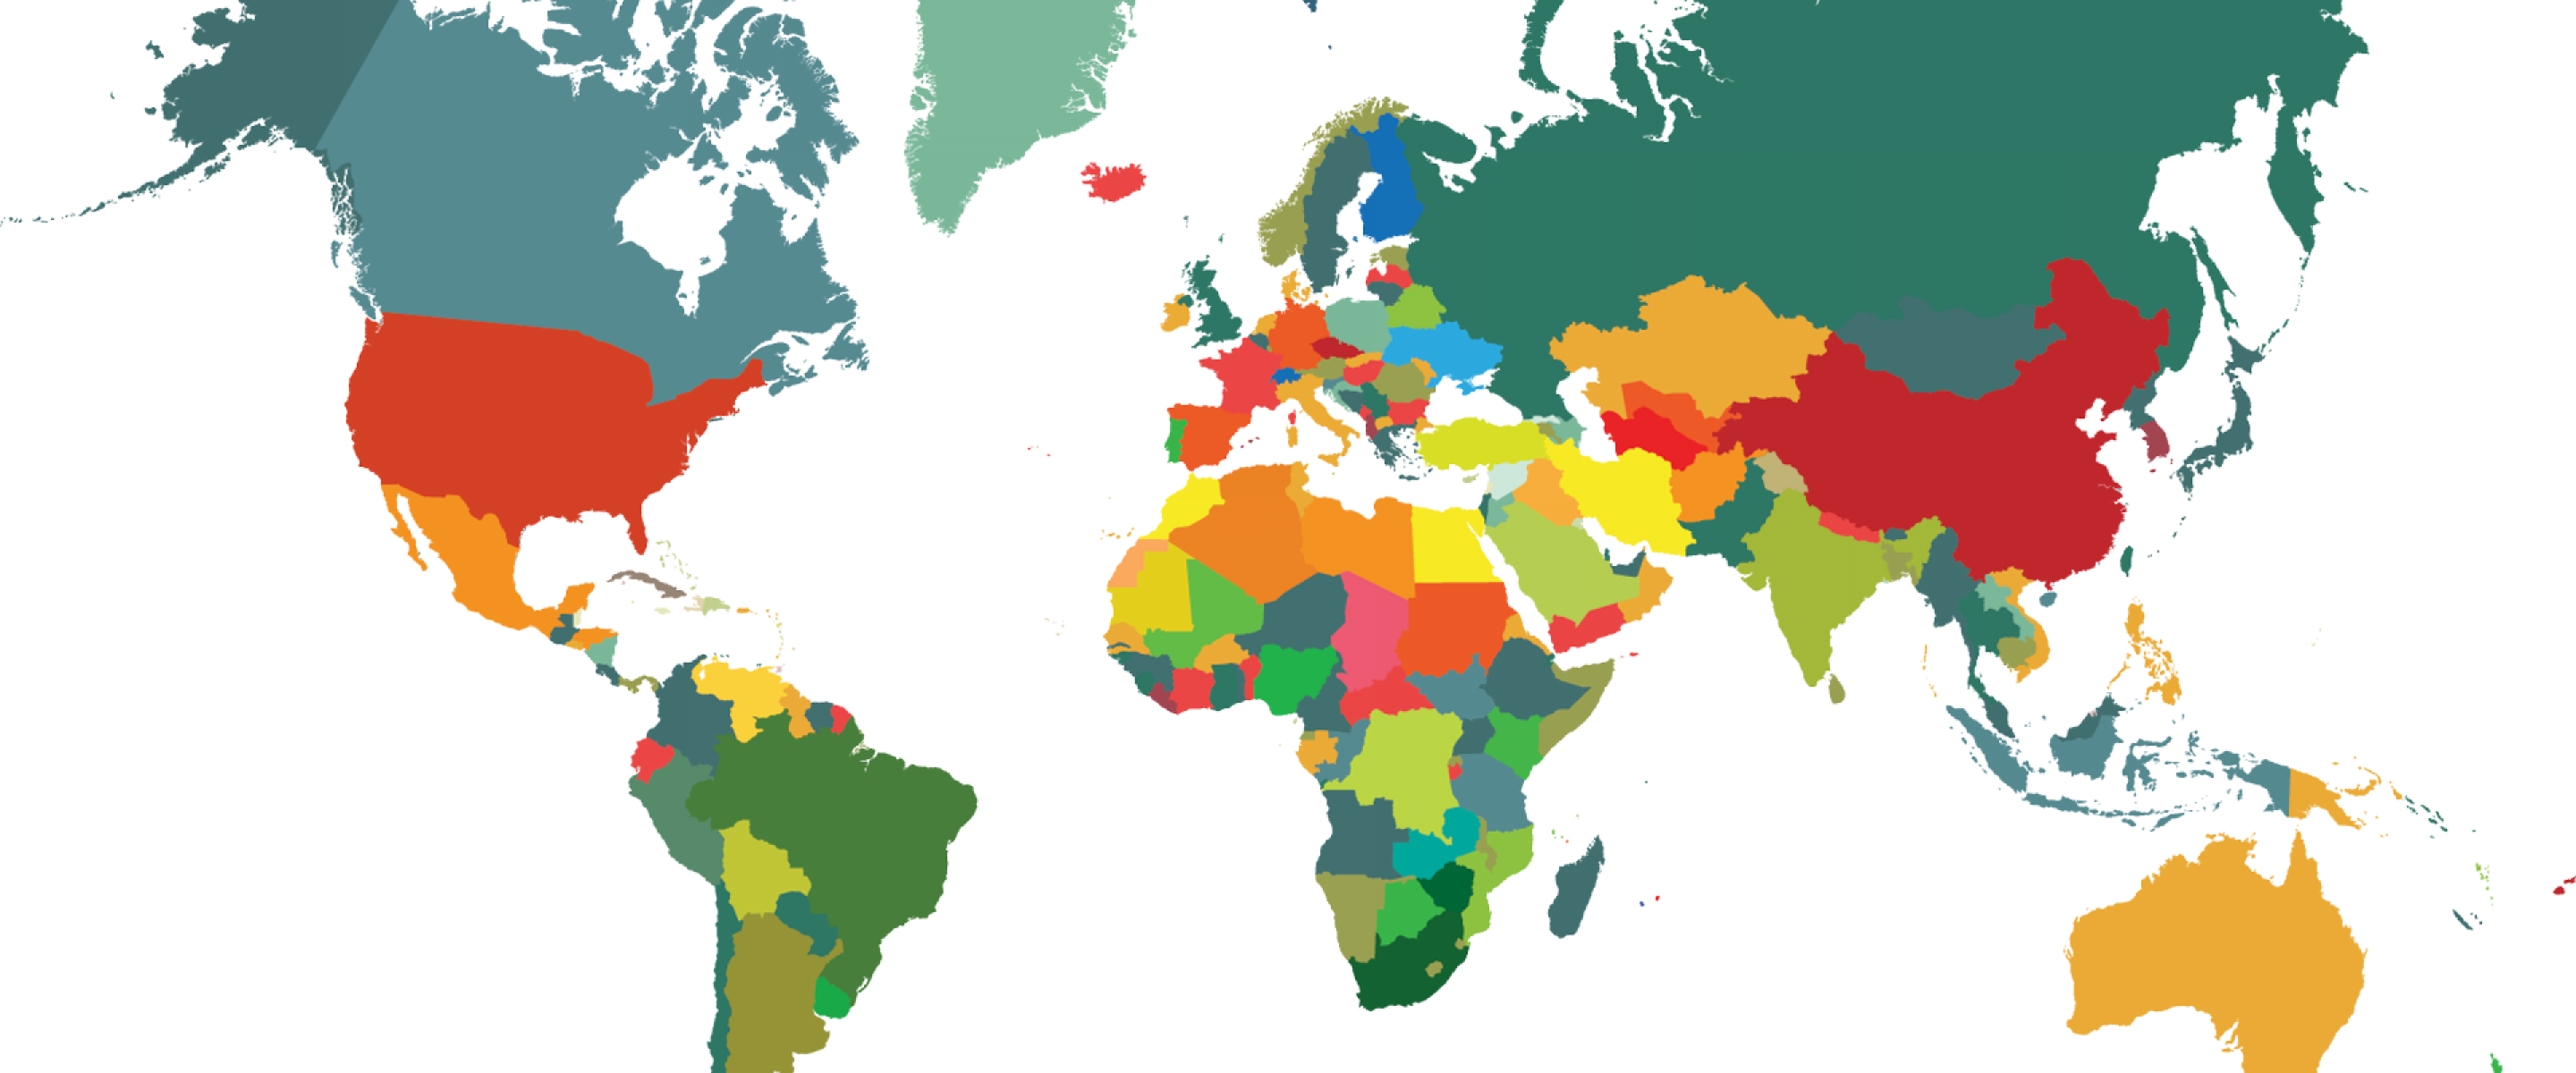 Colorful map of world